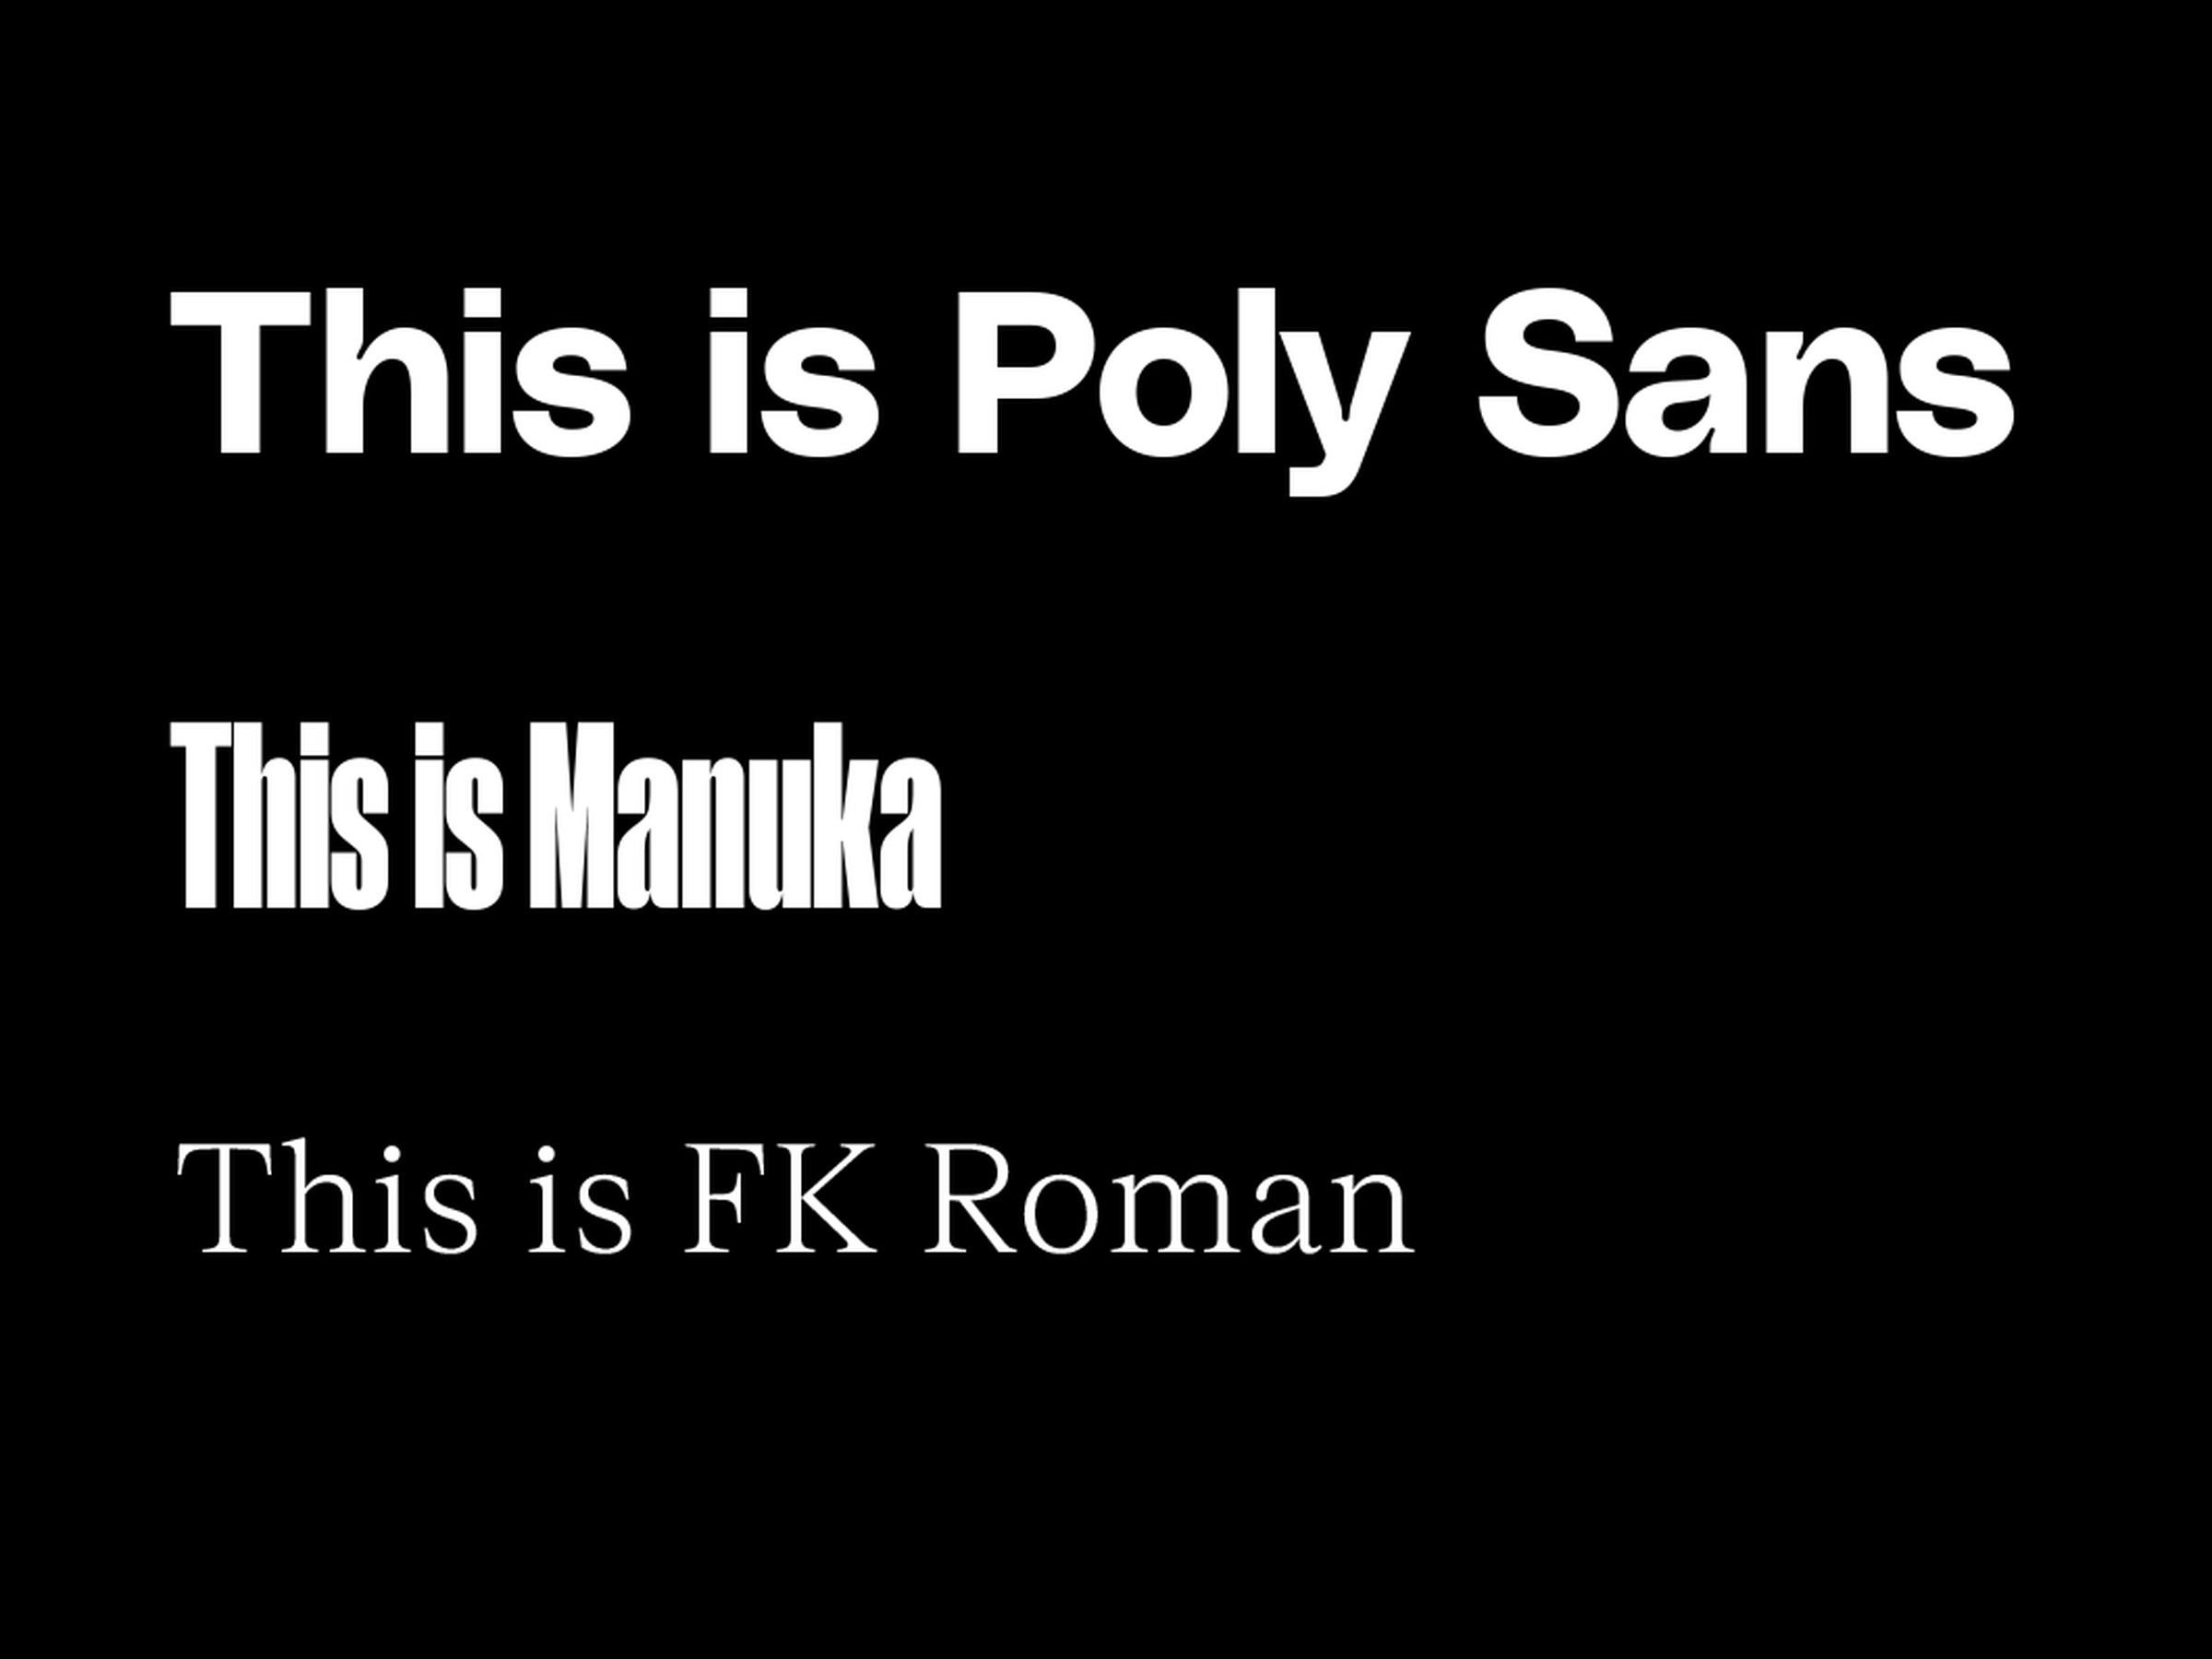 White text with a black background and different fonts that read “This is poly sans” “This is Manuka” “This is FK Roman”